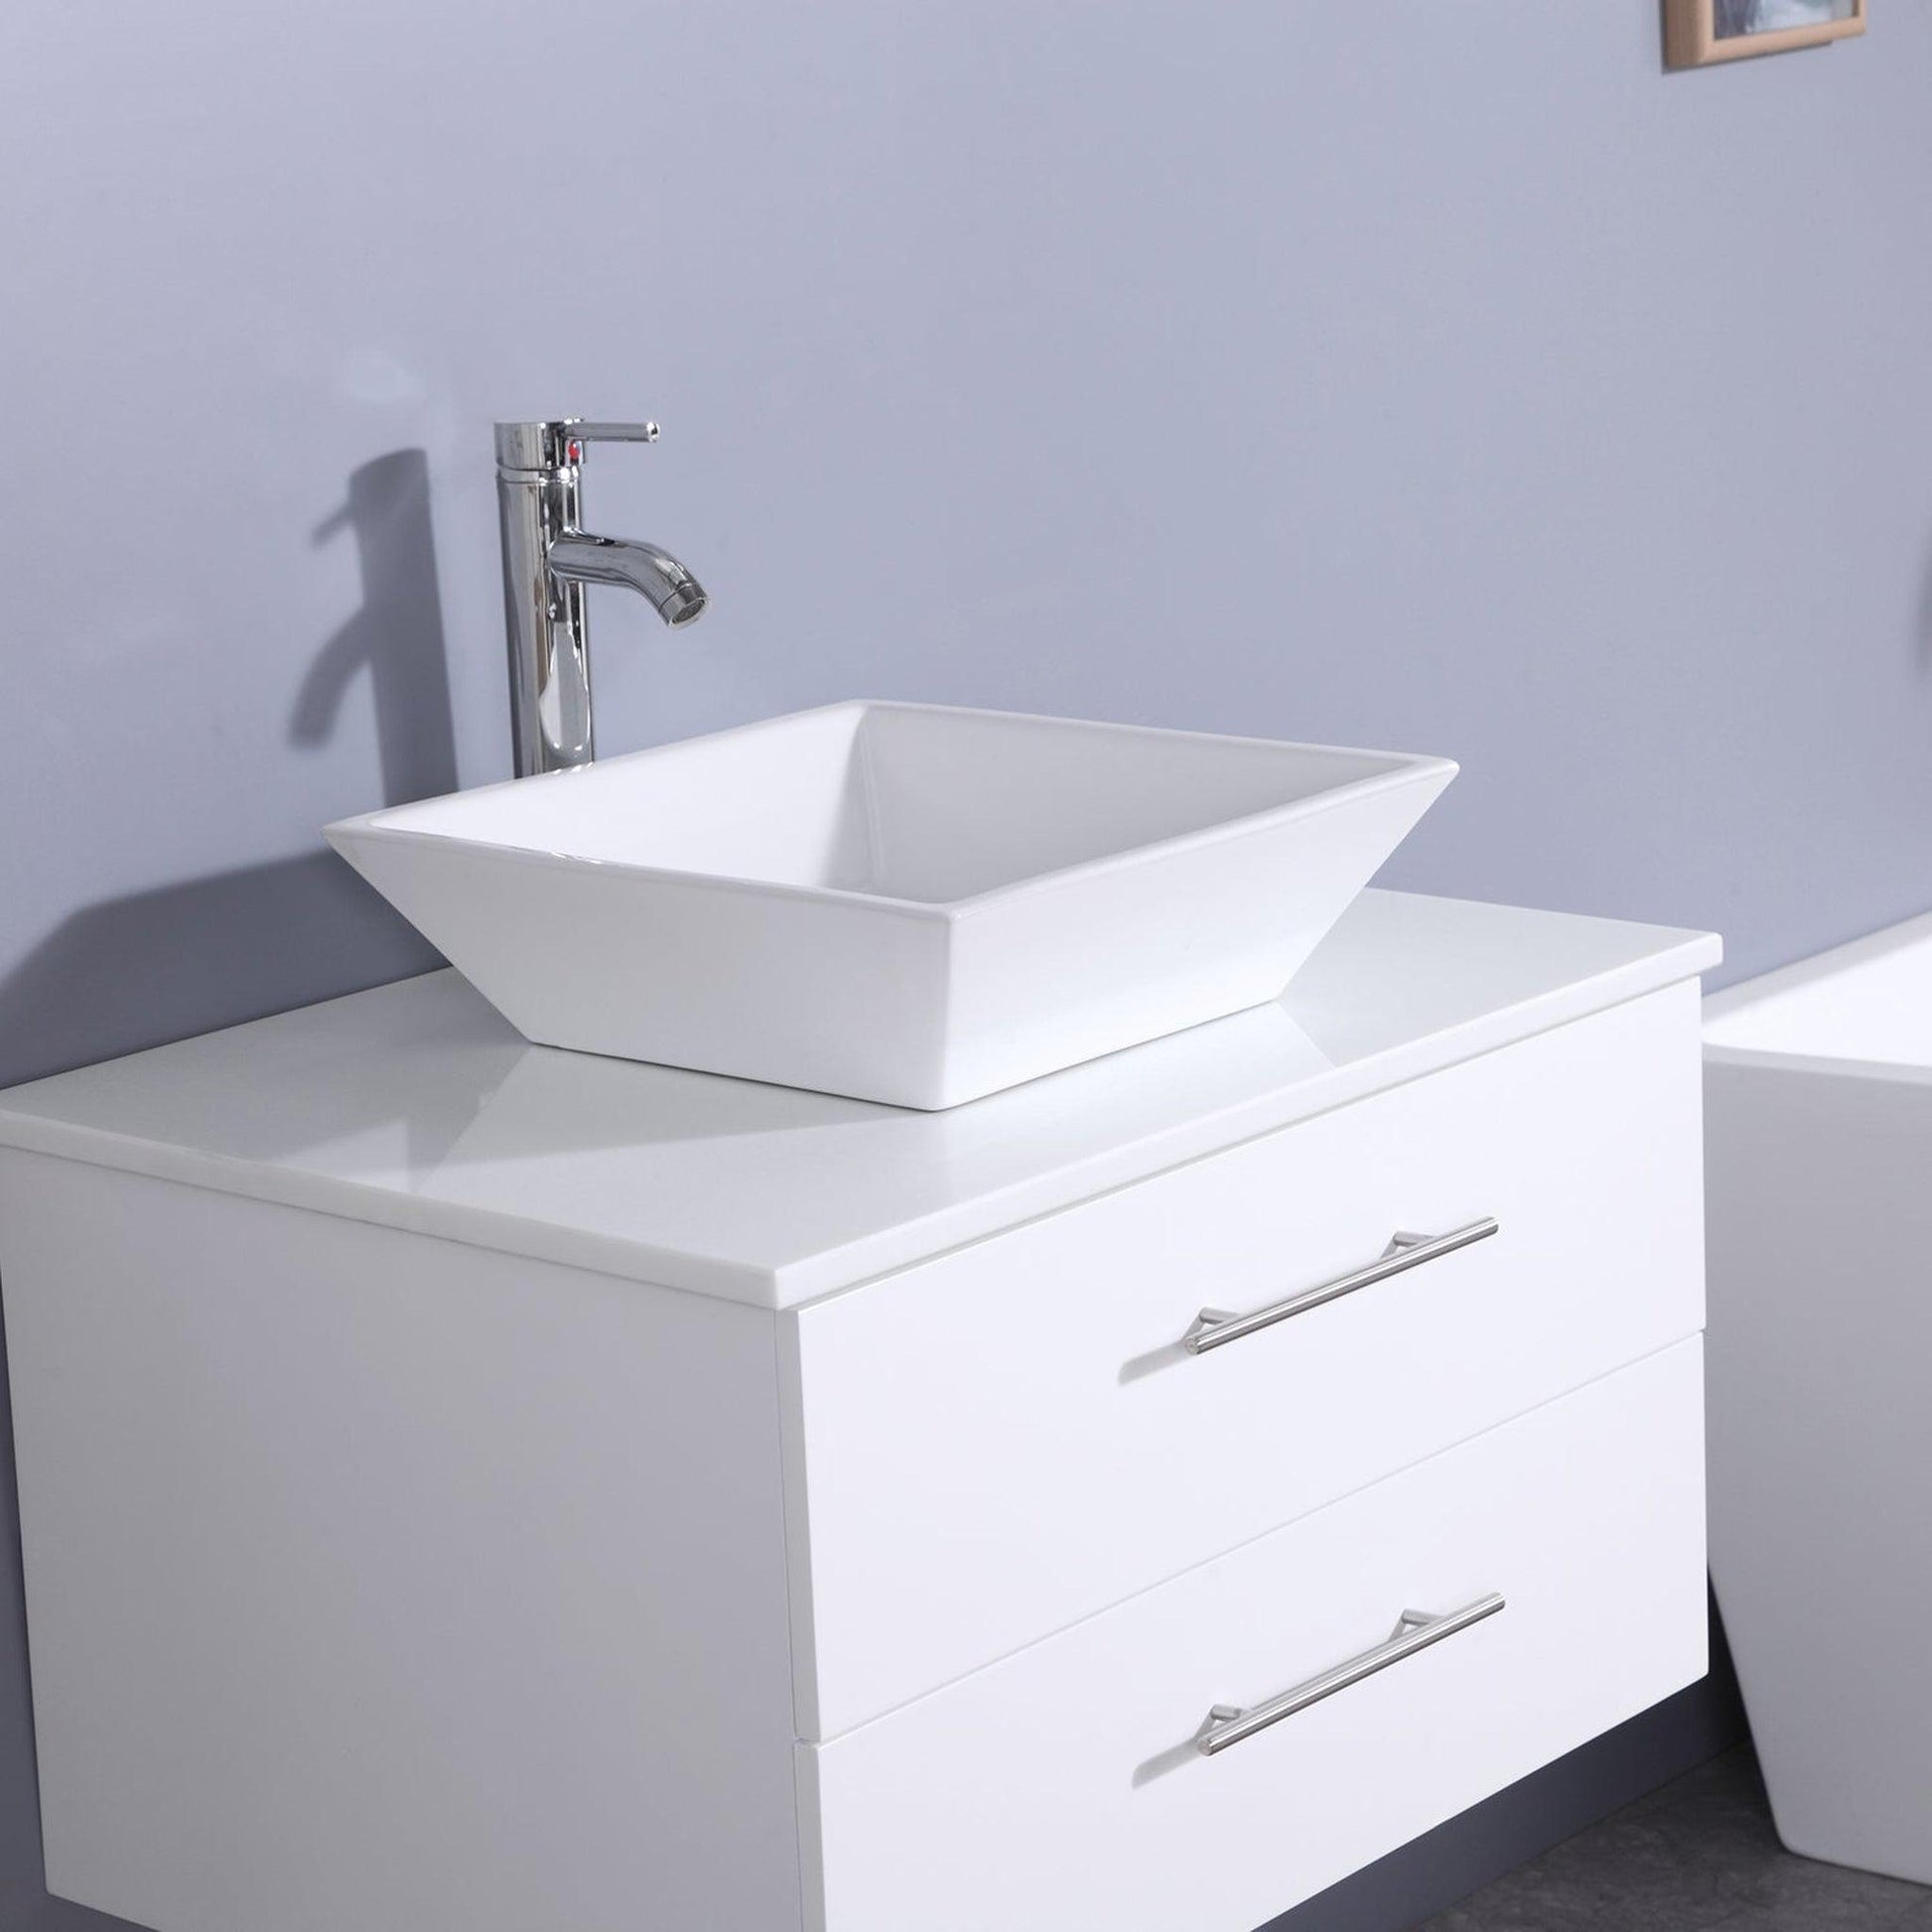 Eviva Totti Wave 24" x 16" White Wall-Mounted Bathroom Vanity With White Man-Made Stone Countertop and Single Porcelain Sink